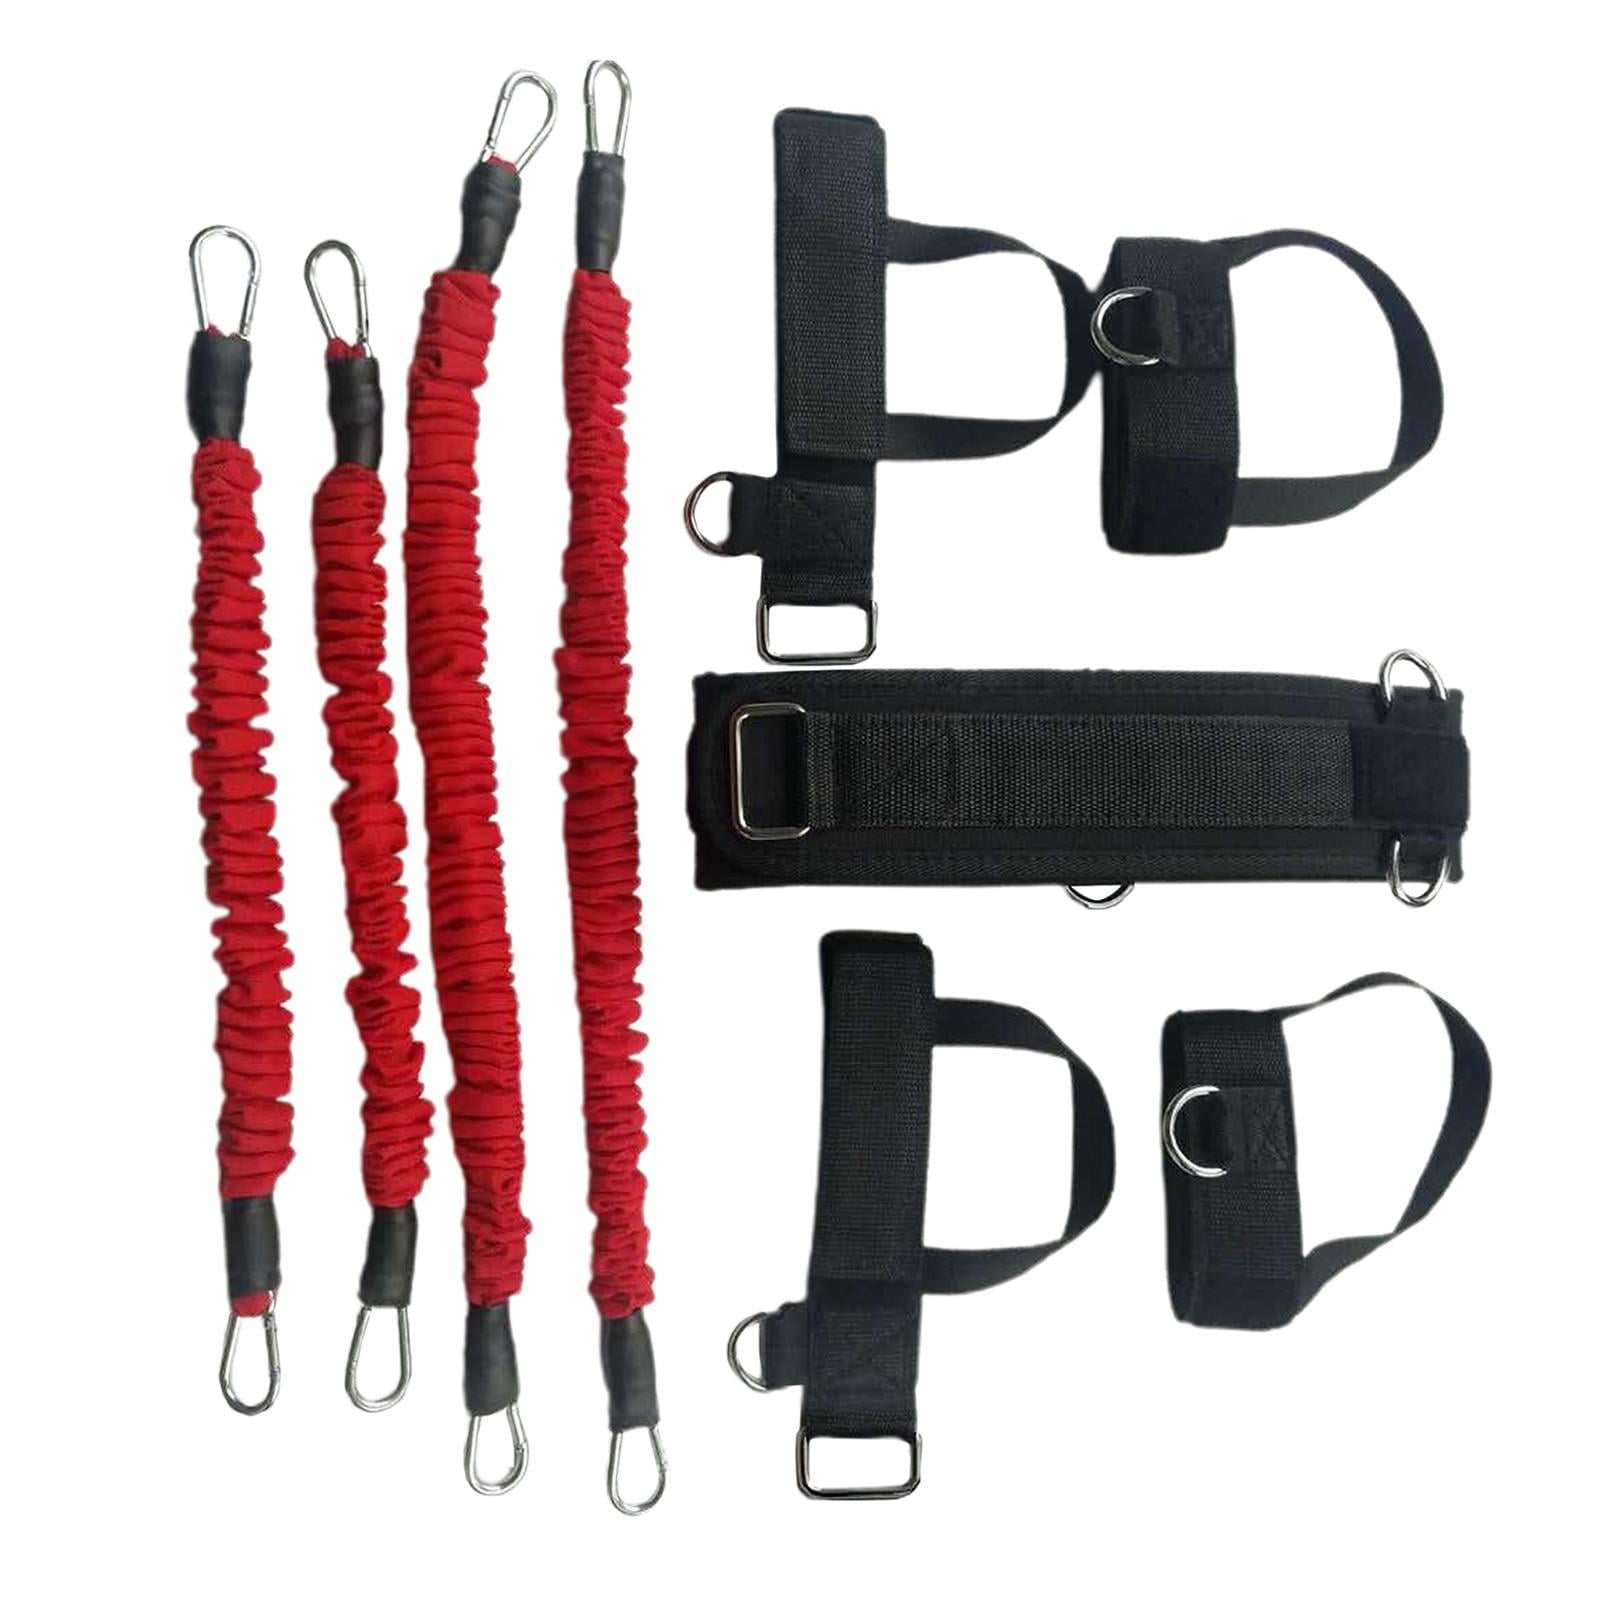 11PCS Fitness Resistance Bands Set for Leg Arm Exercises Boxing Gym Pull up Rope 